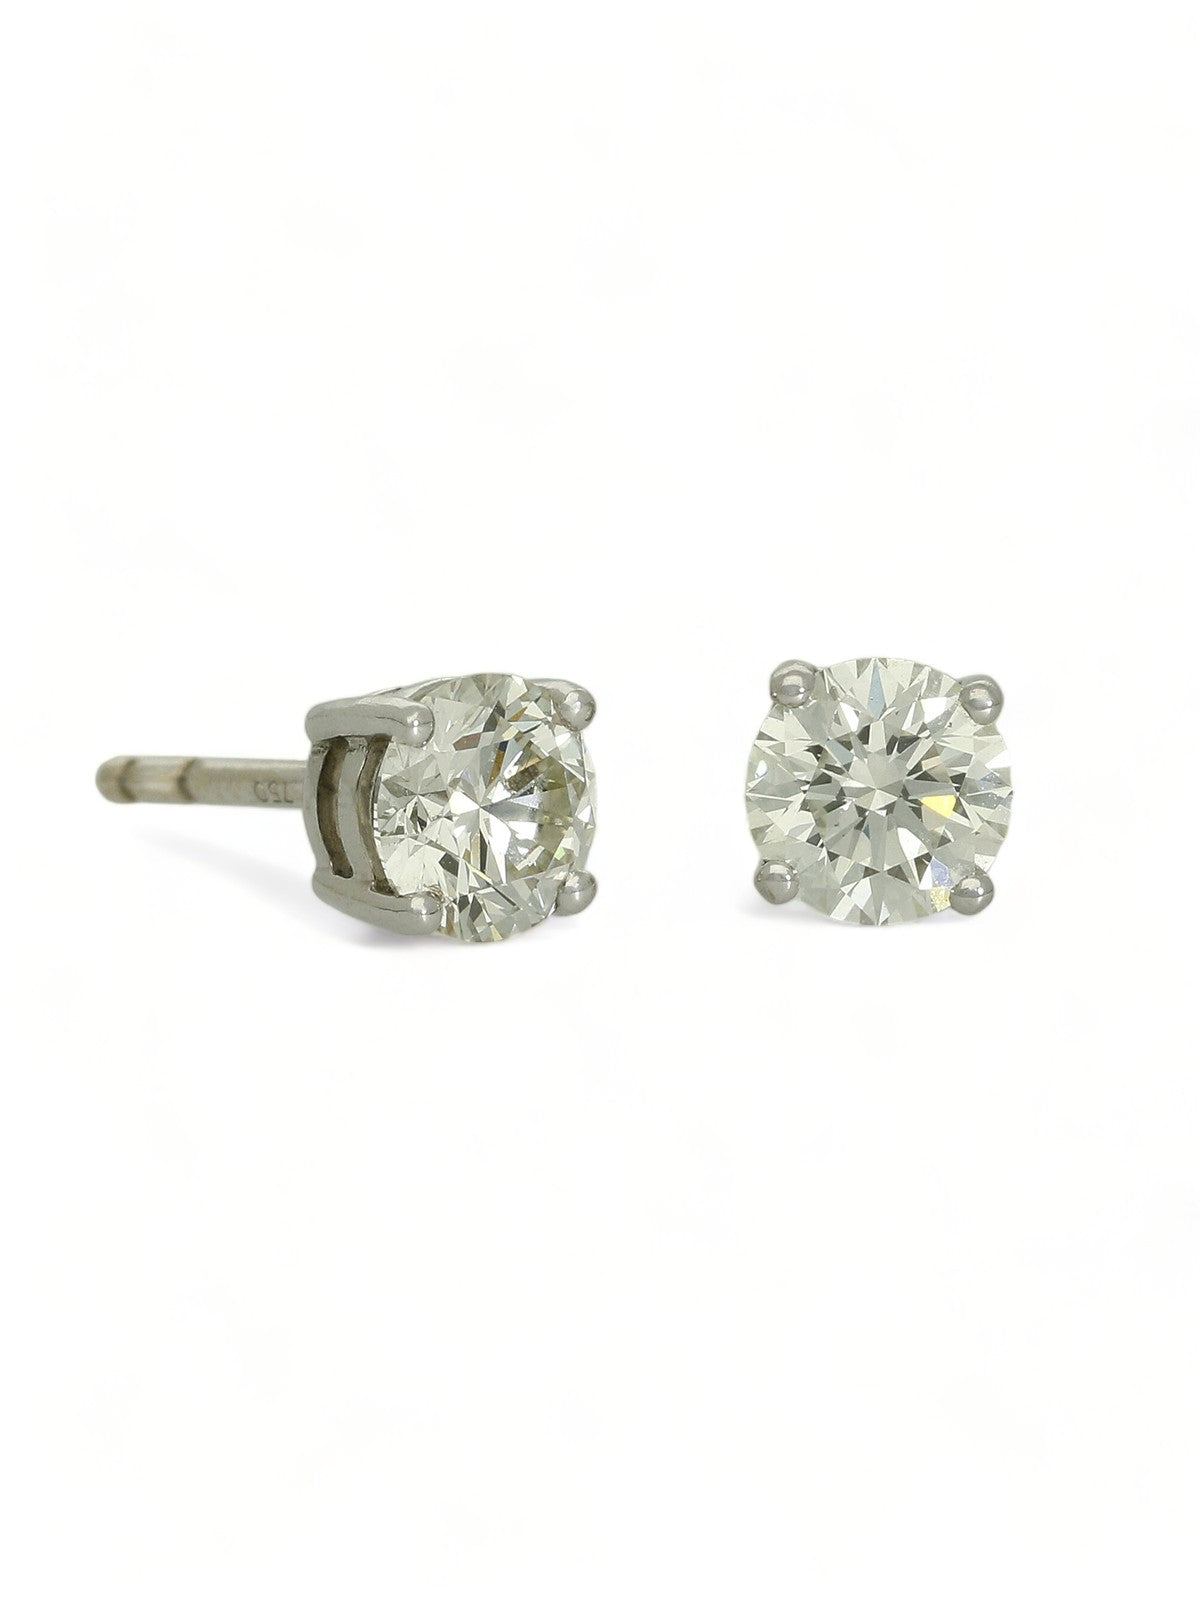 Diamond Solitaire Stud Earrings "The Catherine Collection" 1.40ct Round Brilliant Cut in 18ct White Gold